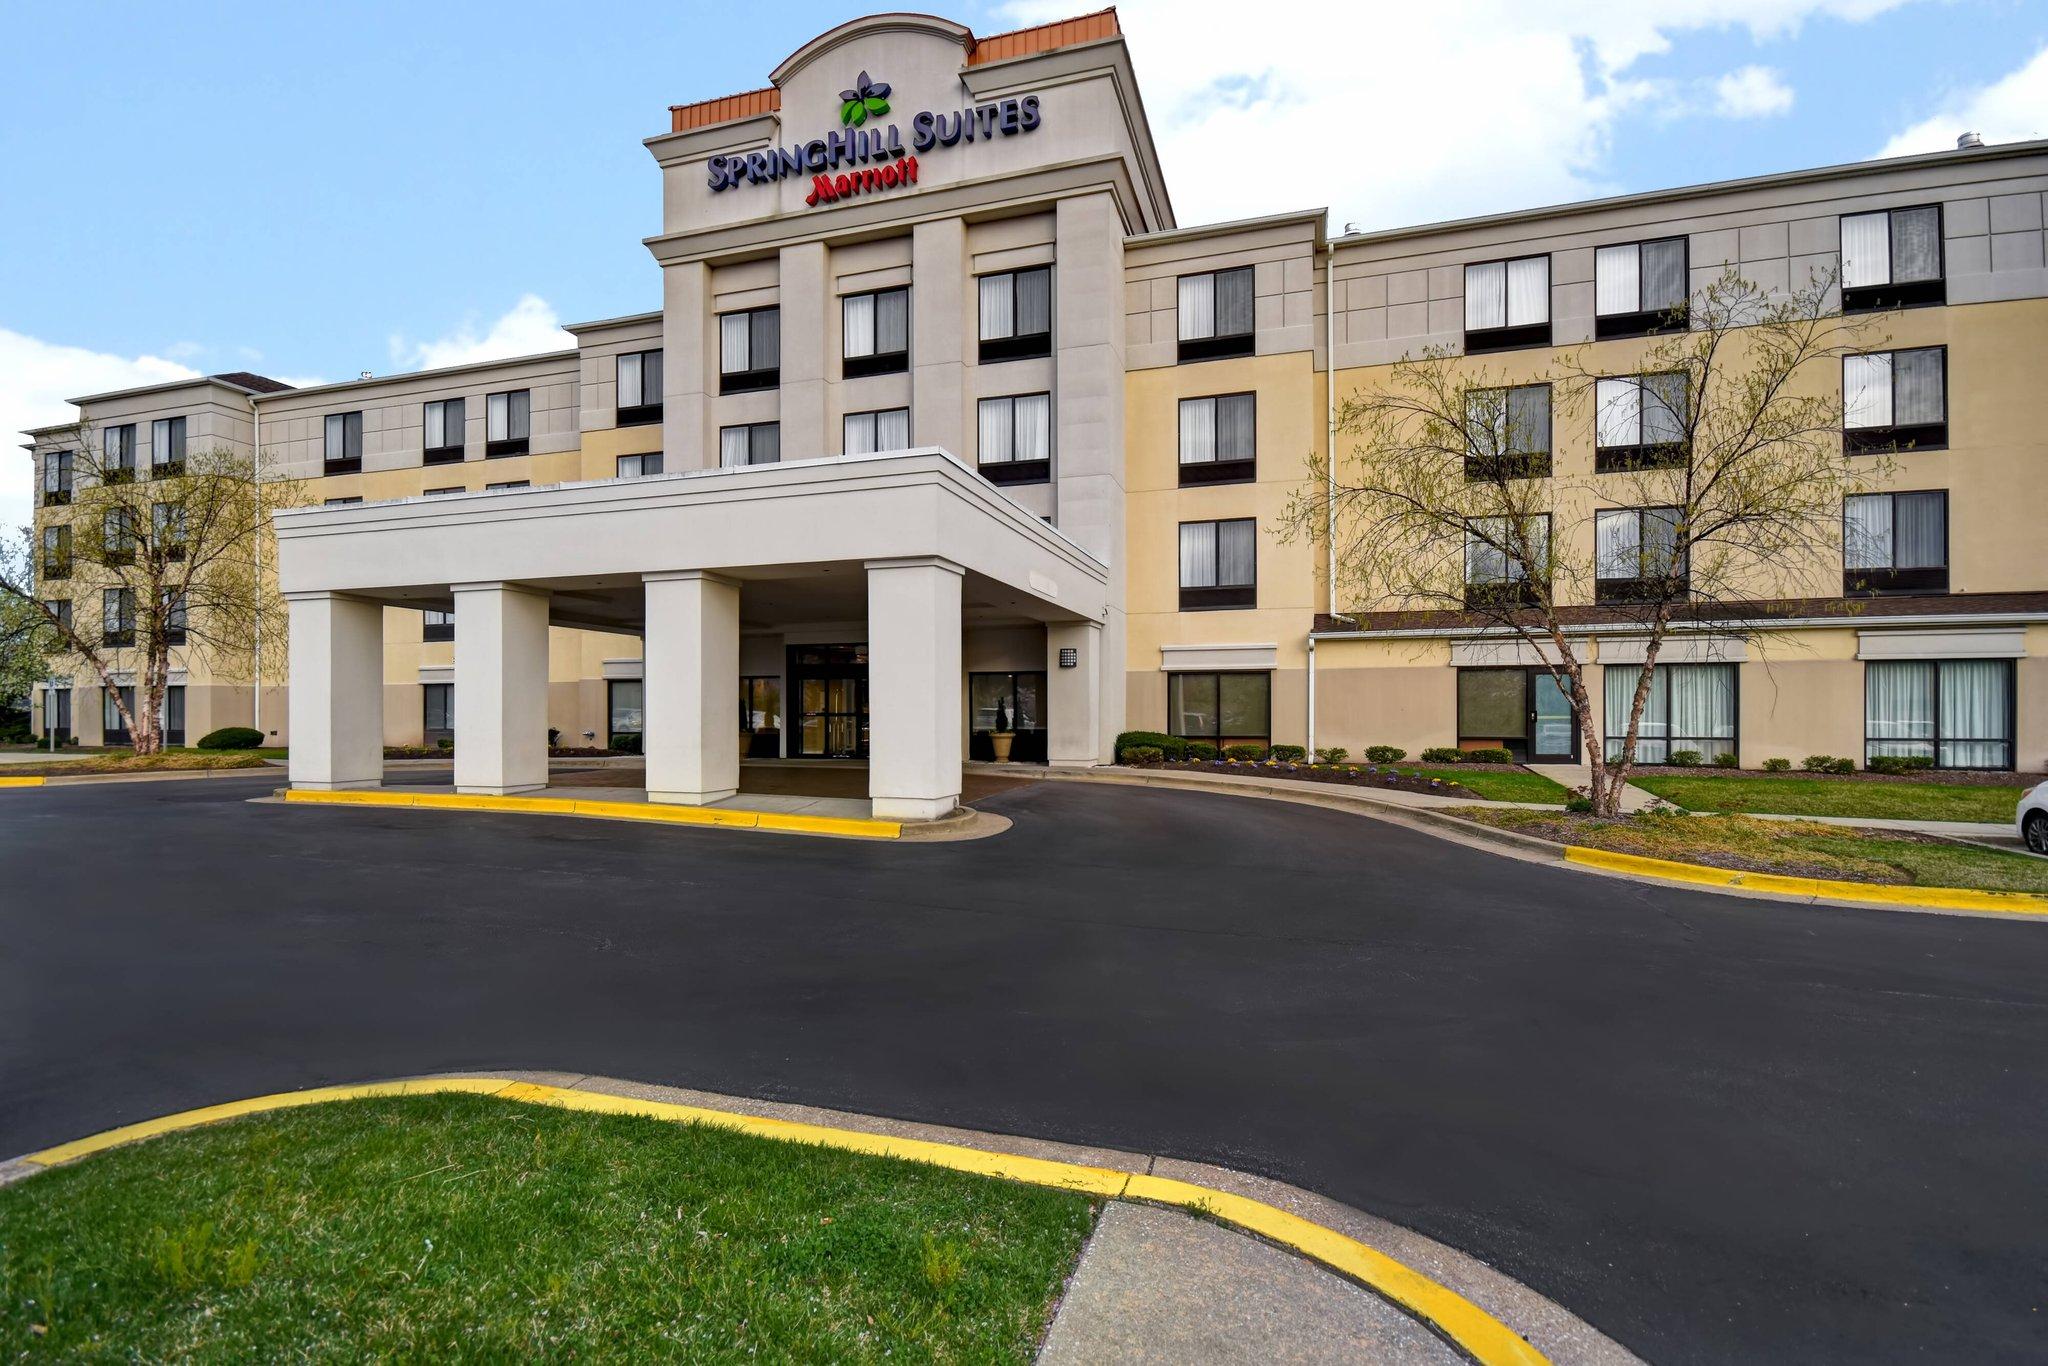 SpringHill Suites Baltimore BWI Airport in Linthicum, MD